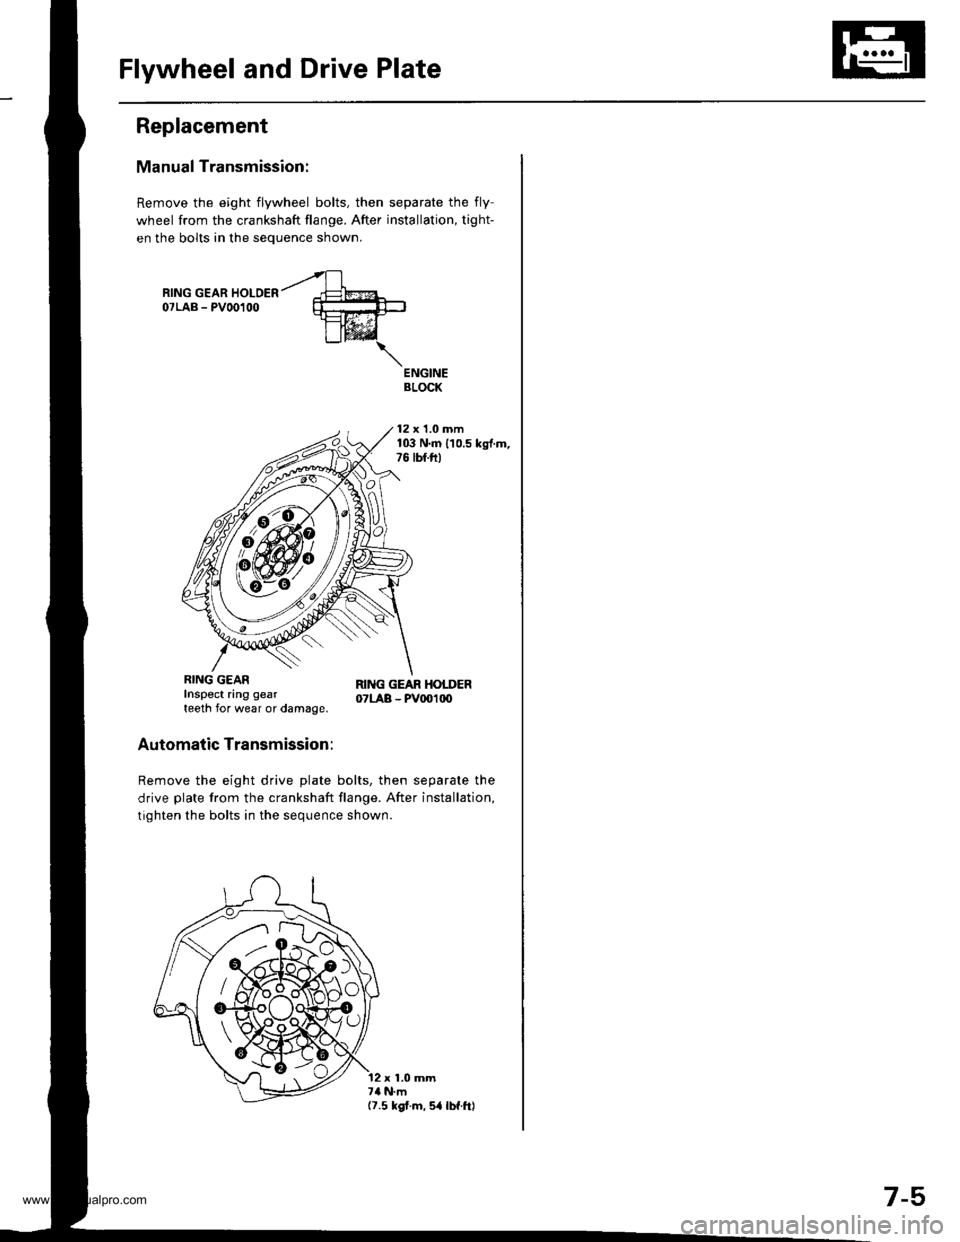 HONDA CR-V 1998 RD1-RD3 / 1.G Workshop Manual 
Flywheel and Drive Plate
Replacement
Manual Transmission:
Remove the eight flywheel bolts, then separate the fly-
wheel from the crankshaft flange. After installation, tight-
en the bolts in the sequ